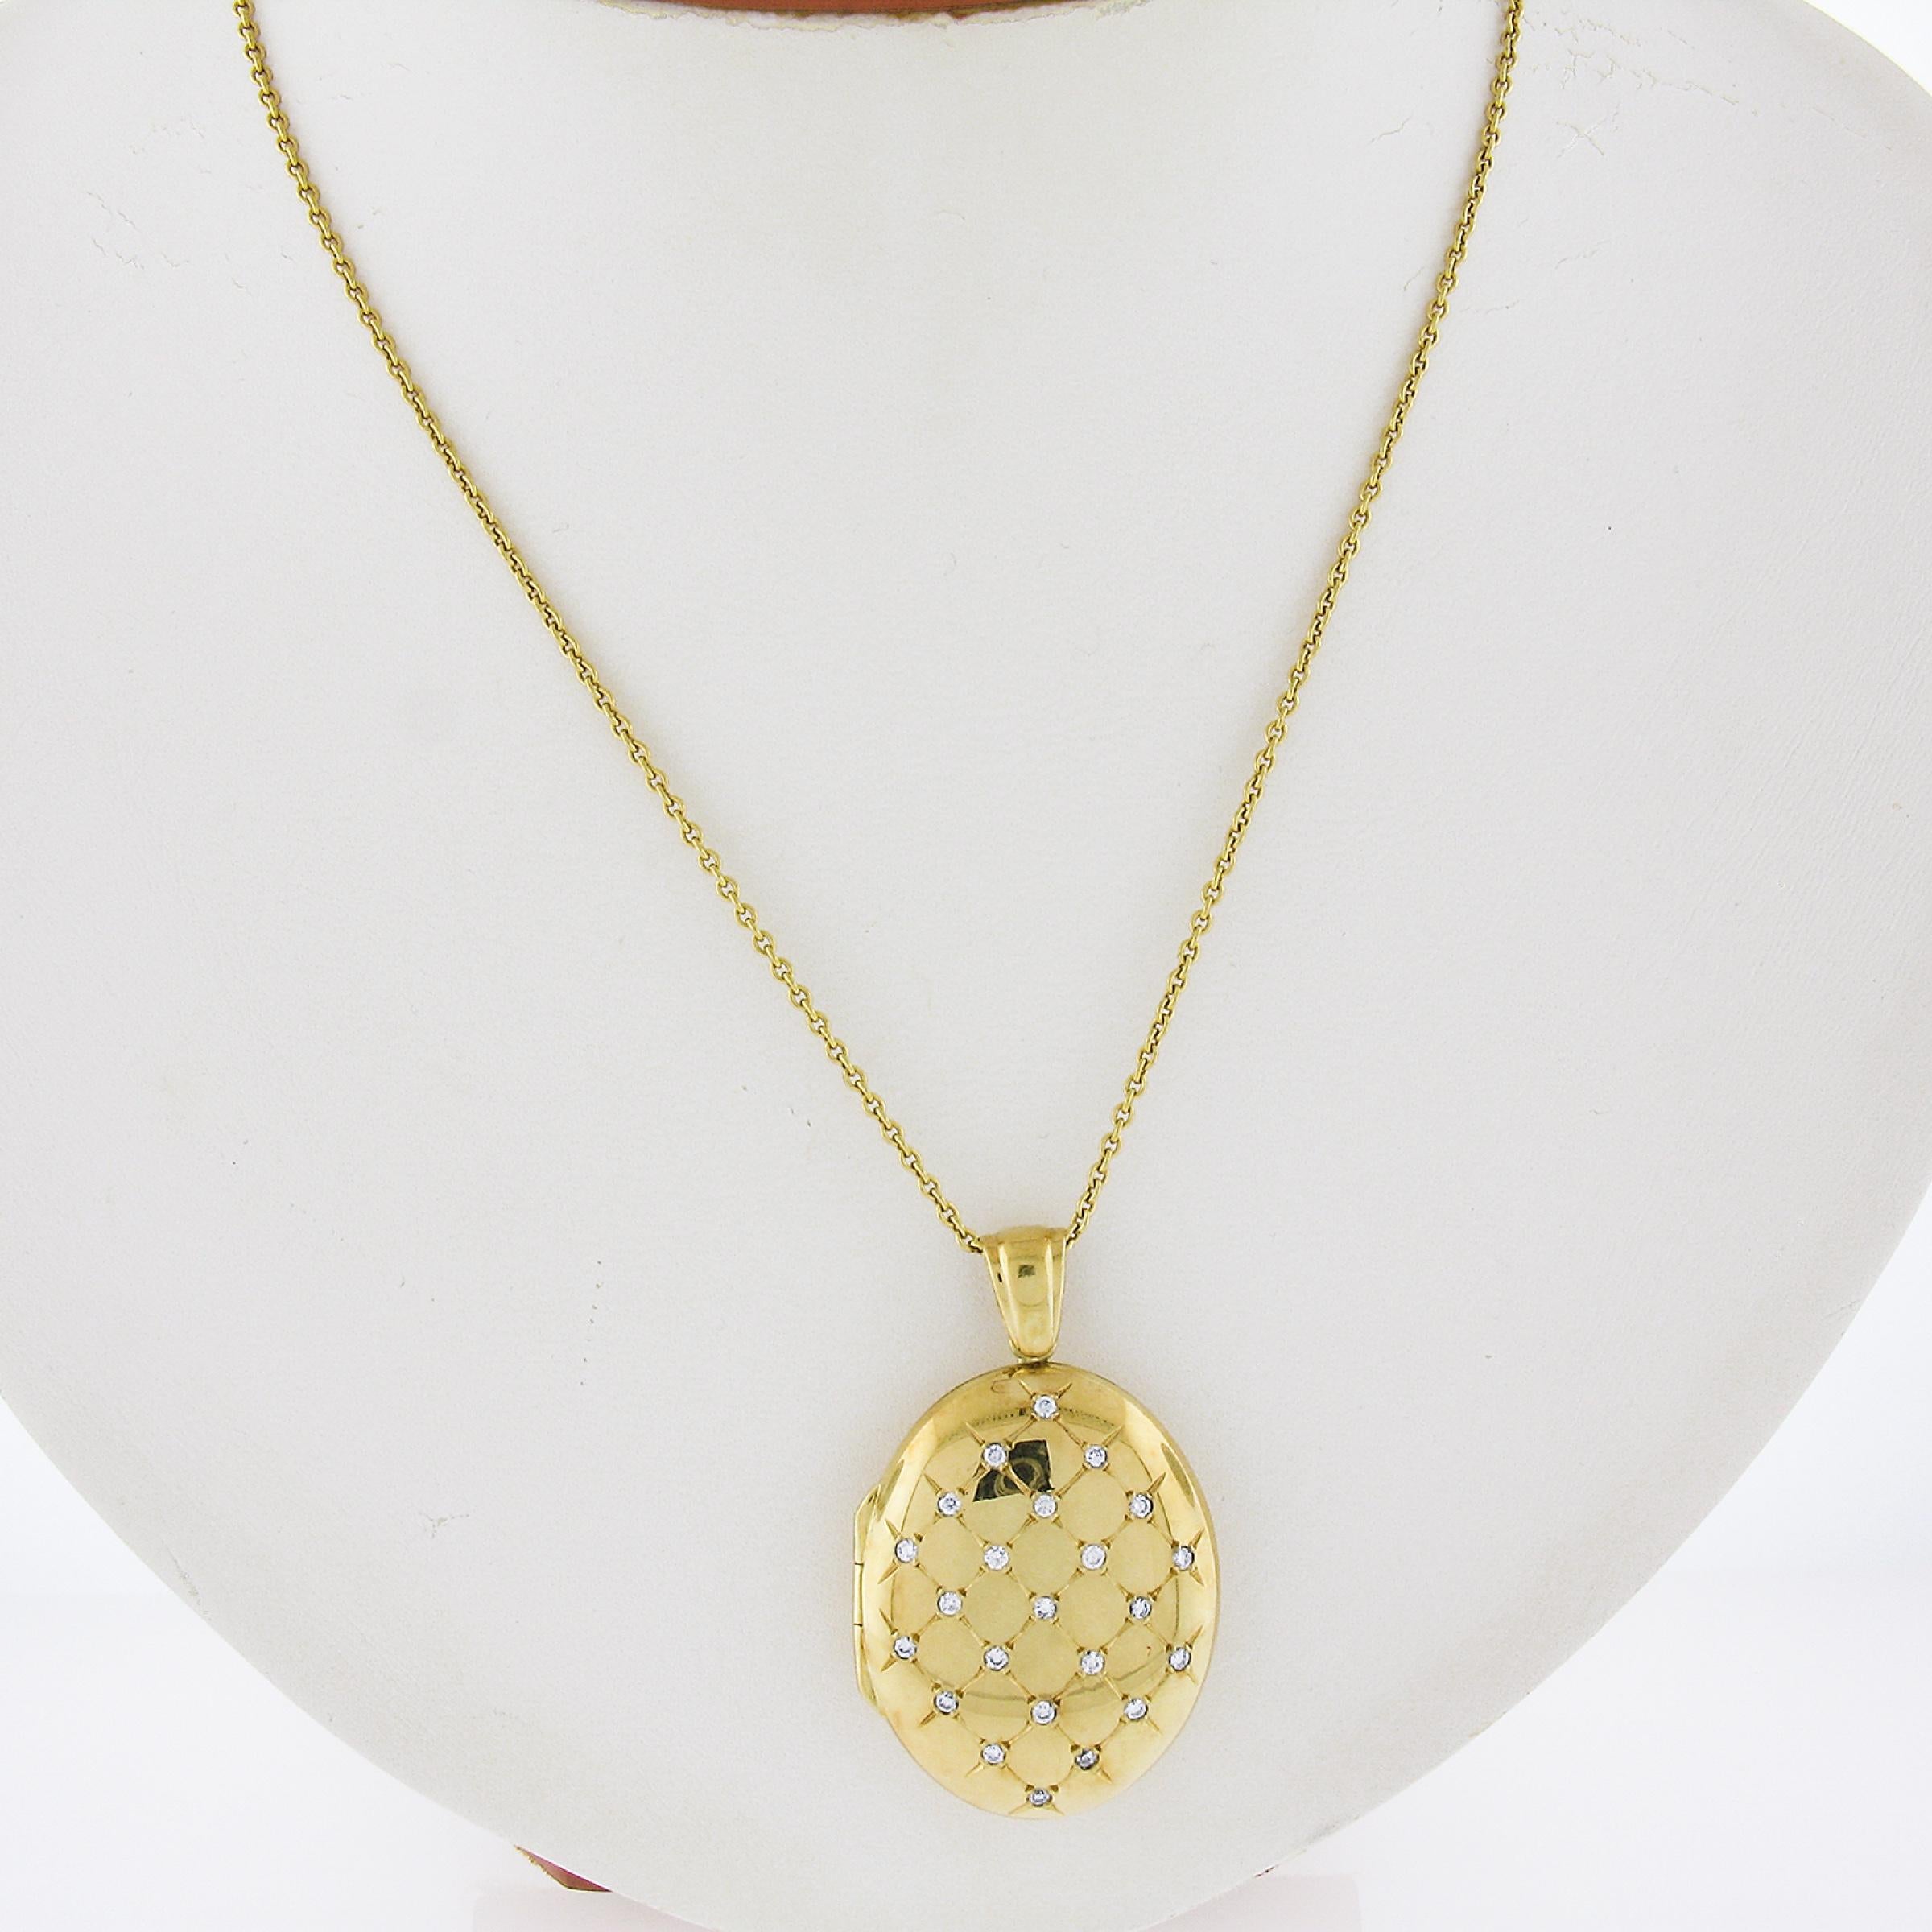 --Stone(s):--
(23) Natural Genuine Diamond - Round Brilliant Cut - Pave Set - G/H Color - VS1-SI1 Clarity
Total Carat Weight:	0.35 (approx.)

Material: Solid 18k Yellow Gold (locket & chain). Leather, Glass & Plastic (inside frames)
Weight: 18